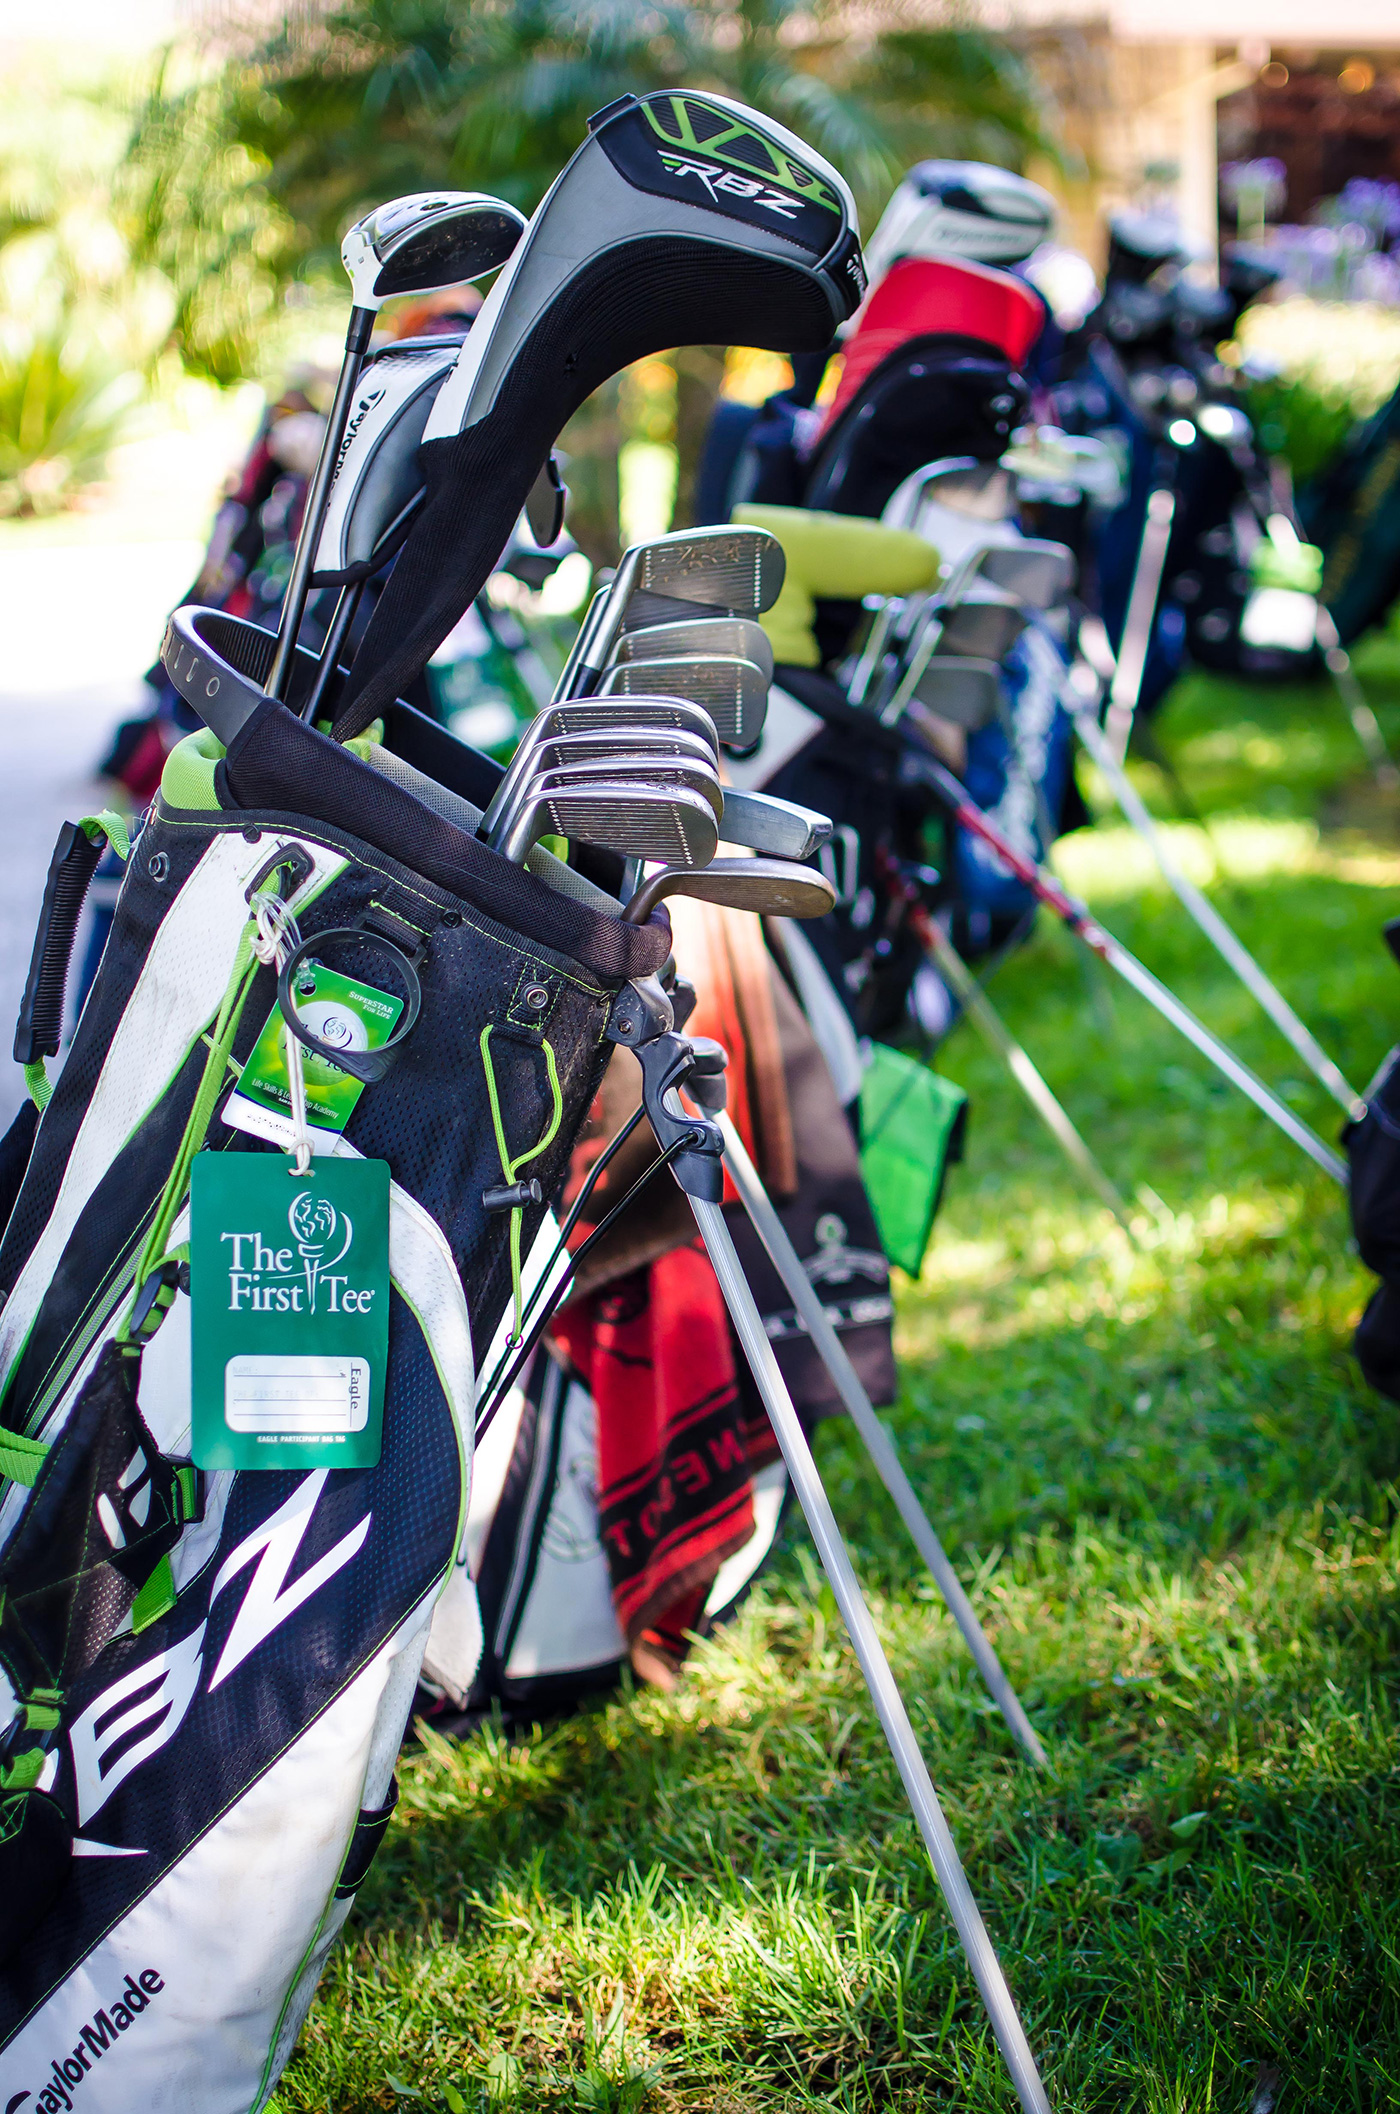 Equipment Donations Donate Golf Clubs in Denver with First Tee